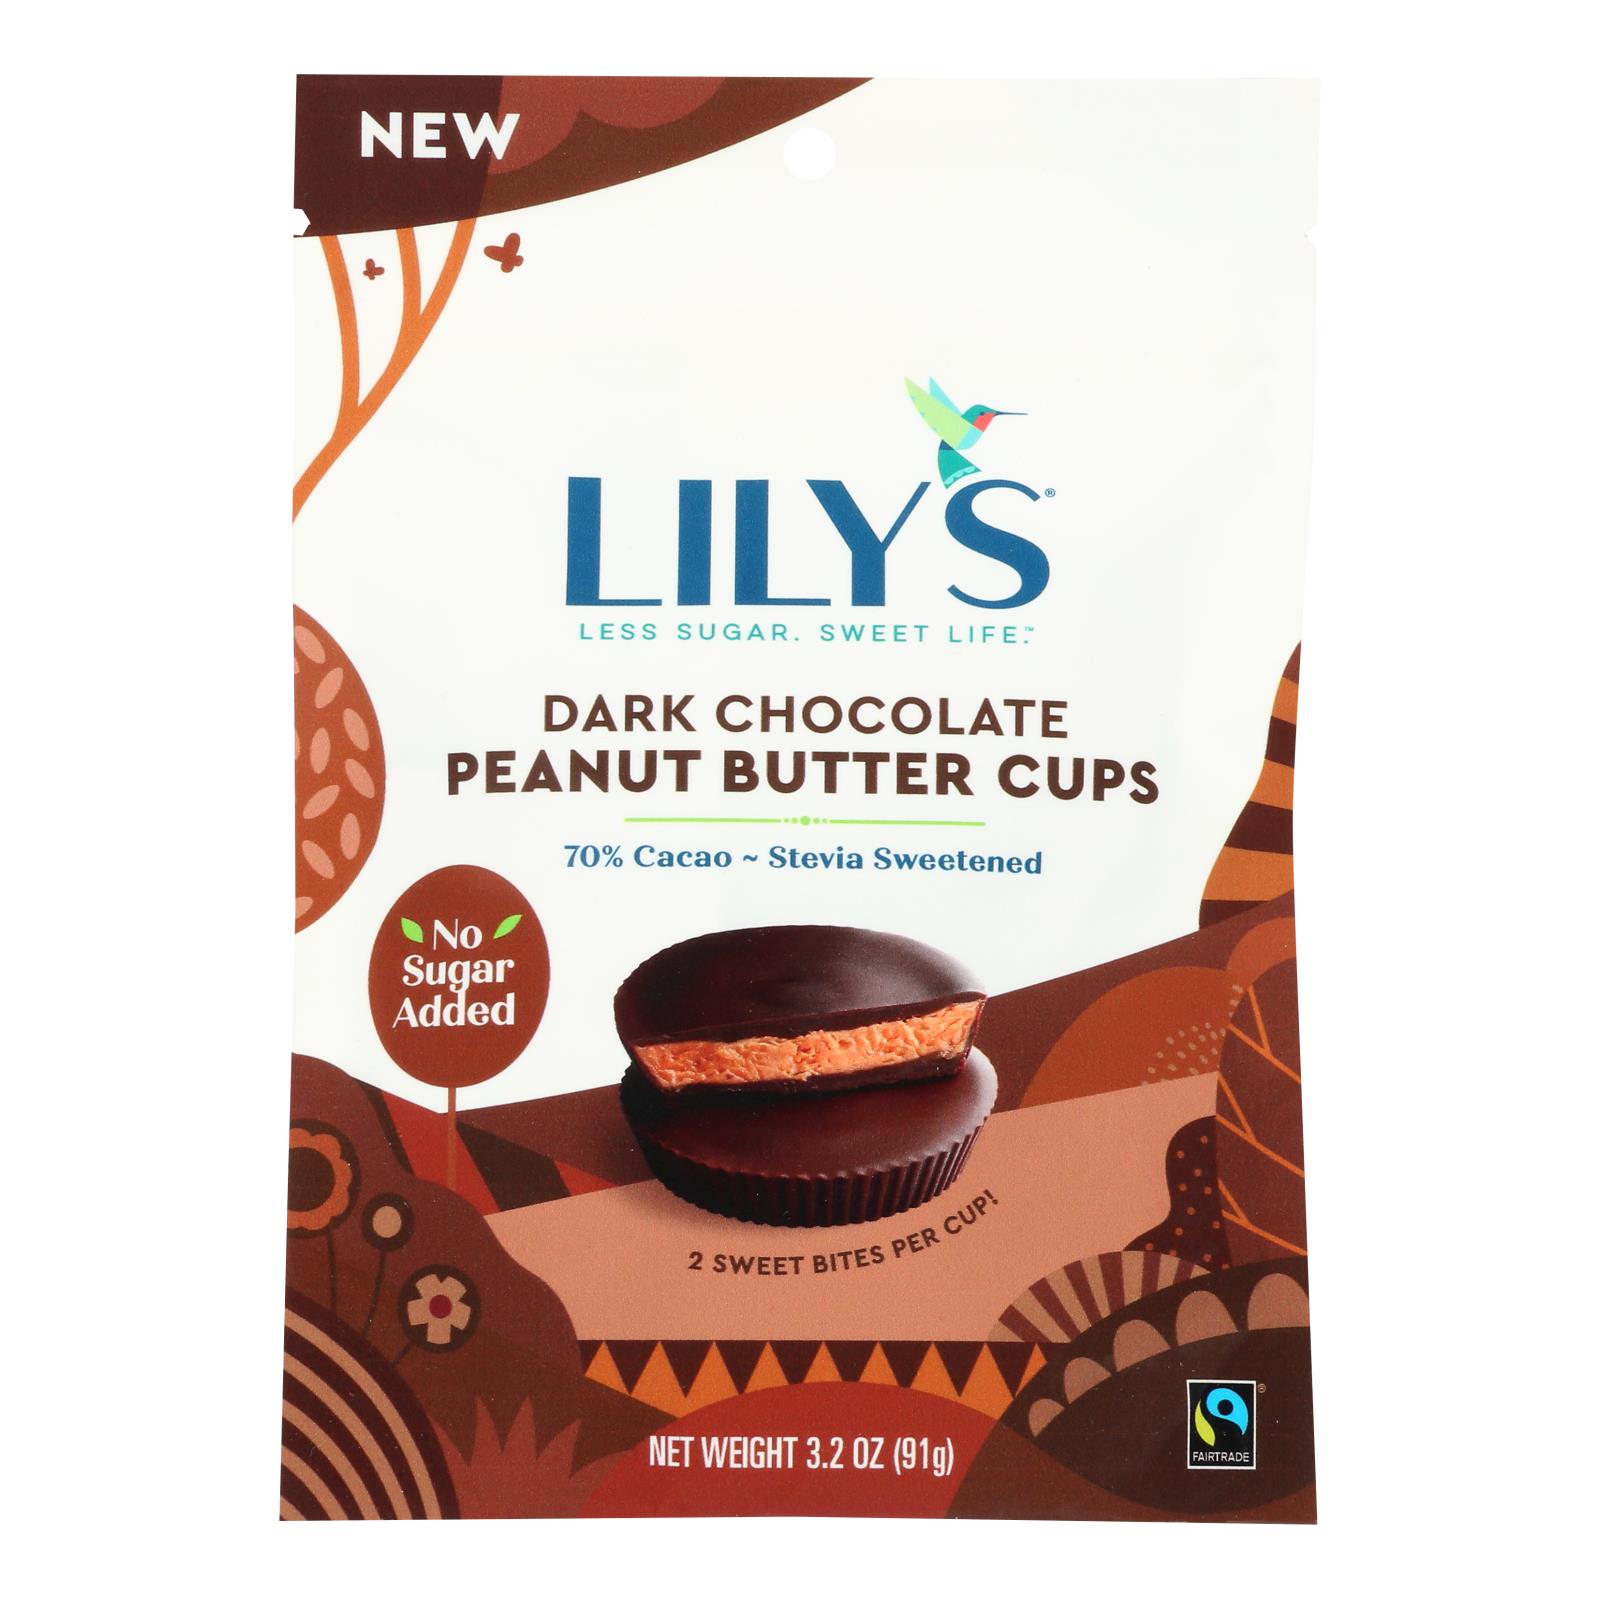 Lily's Sweets - Peanut Butter Cup Dark Chocolate - 12개 묶음상품 - 3.2 OZ